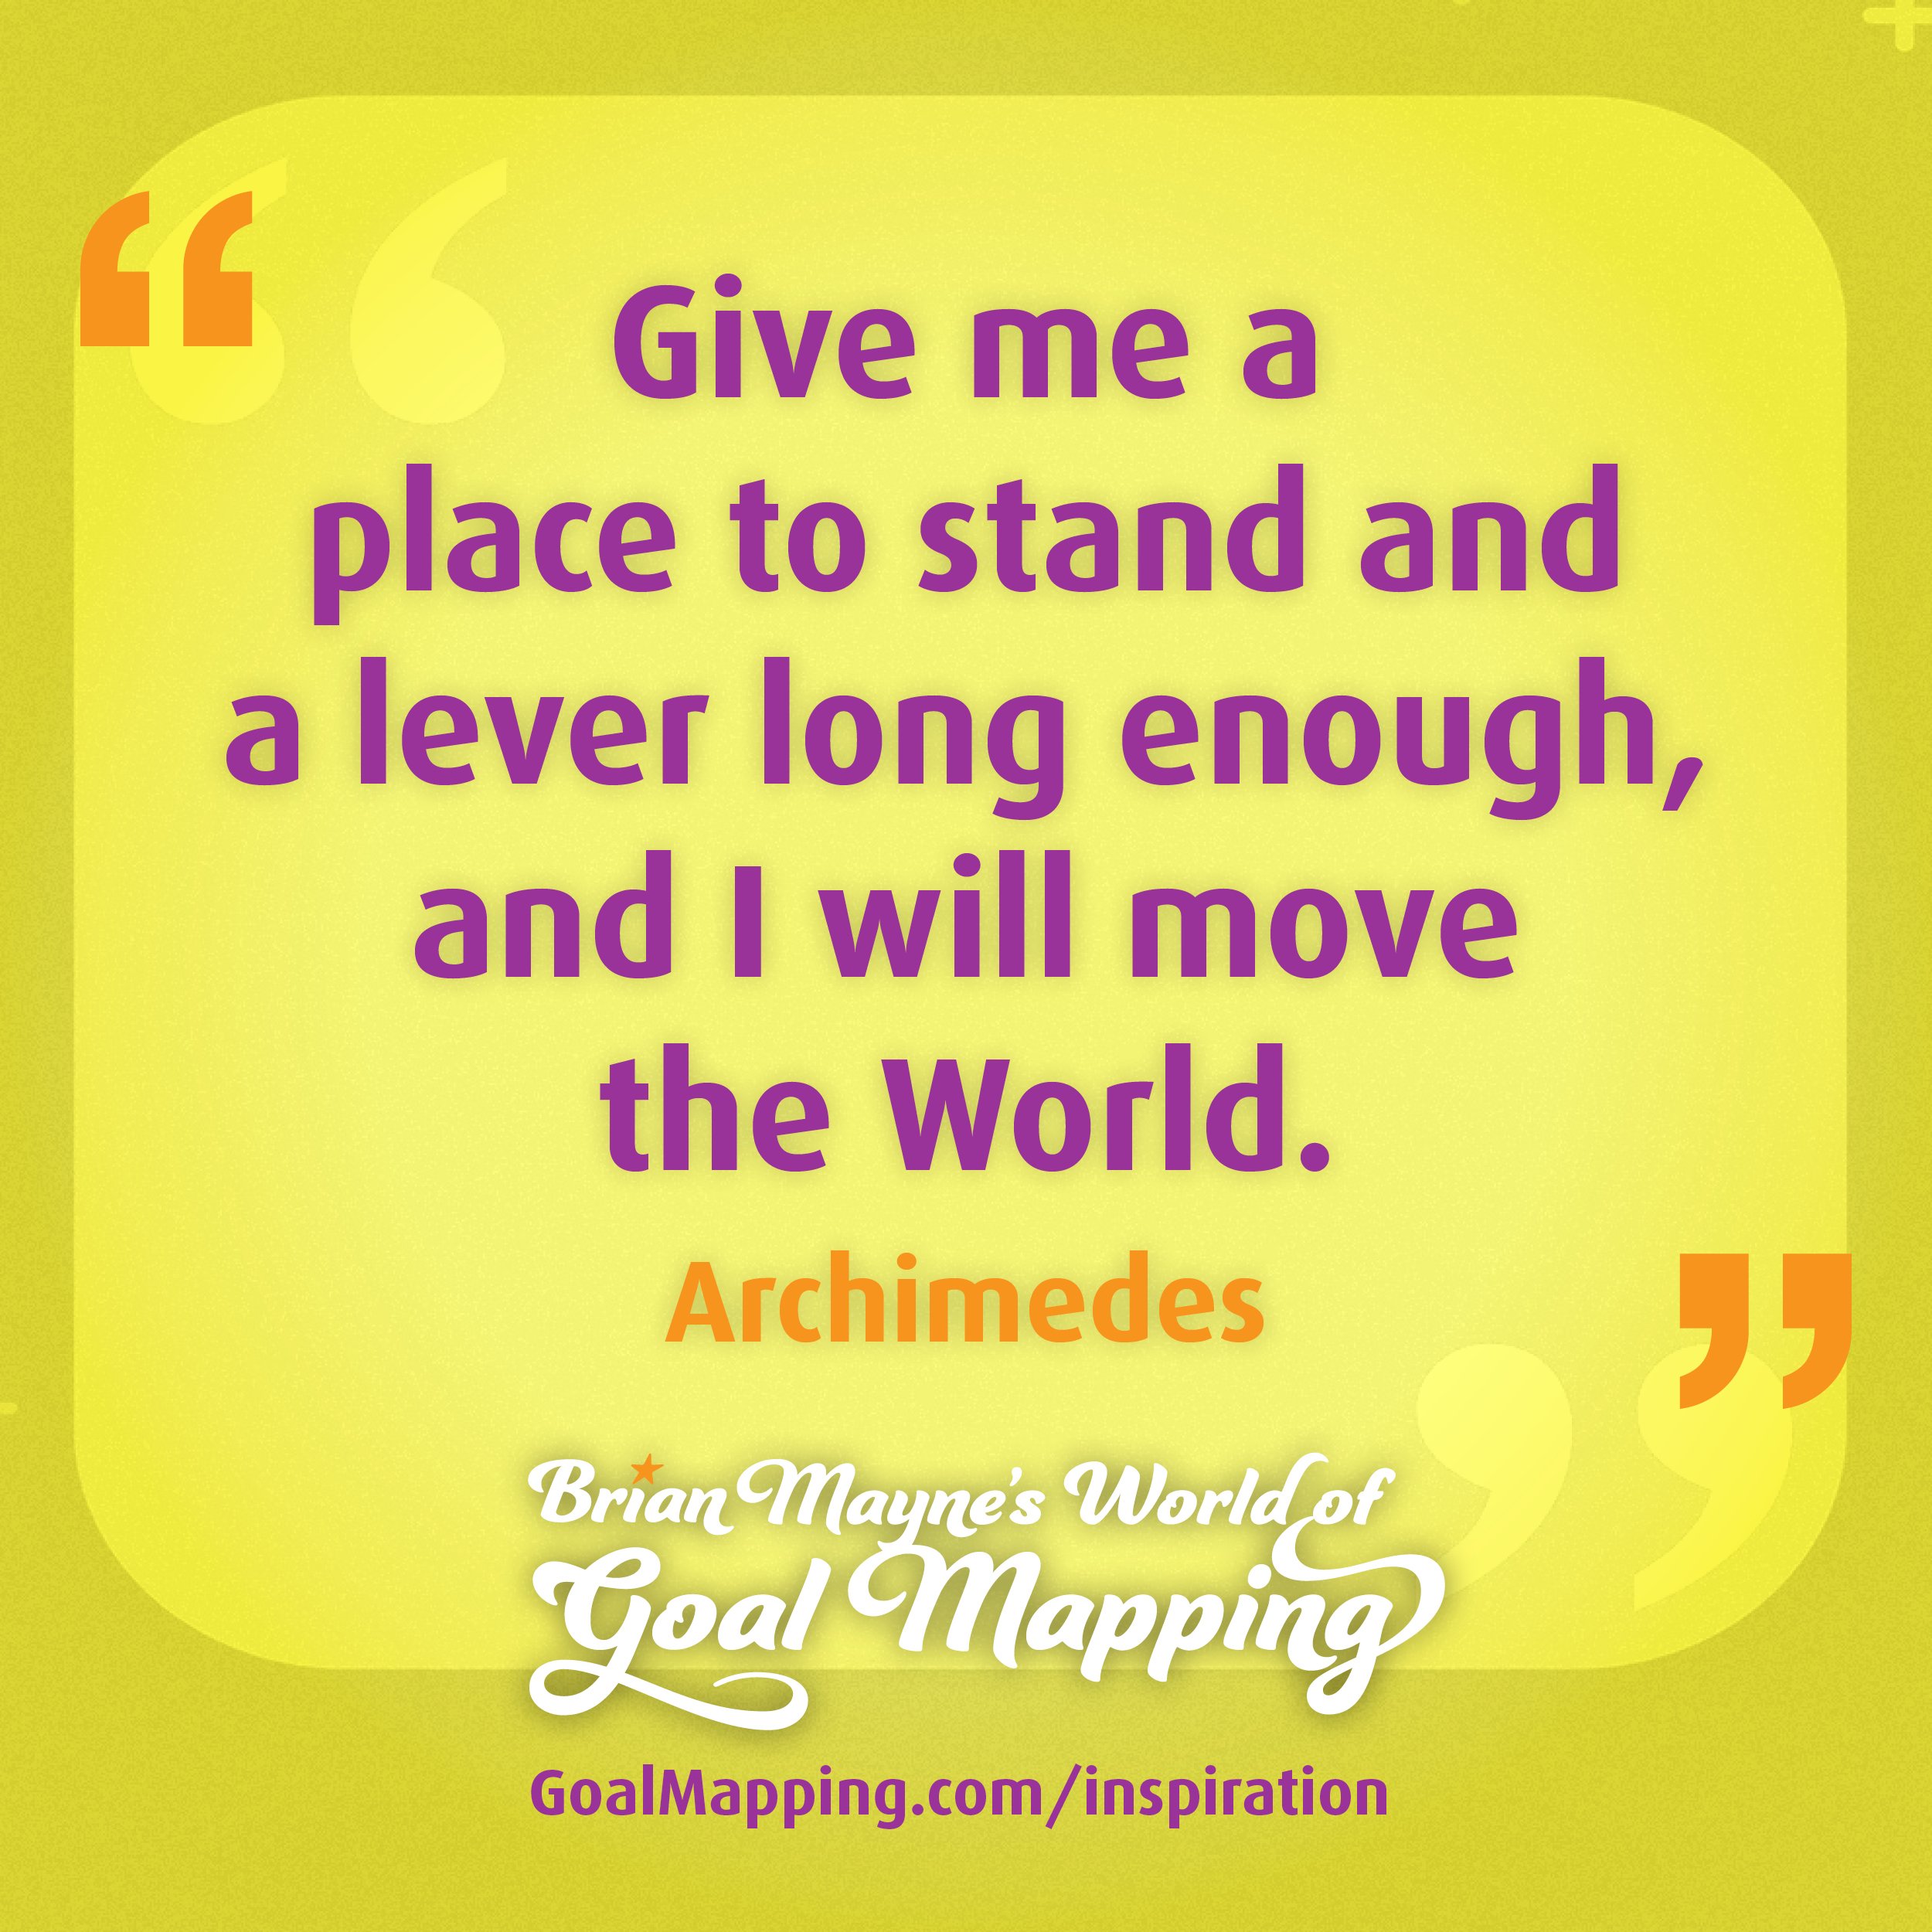 "Give me a place to stand and a lever long enough, and I will move the World." Archimedes